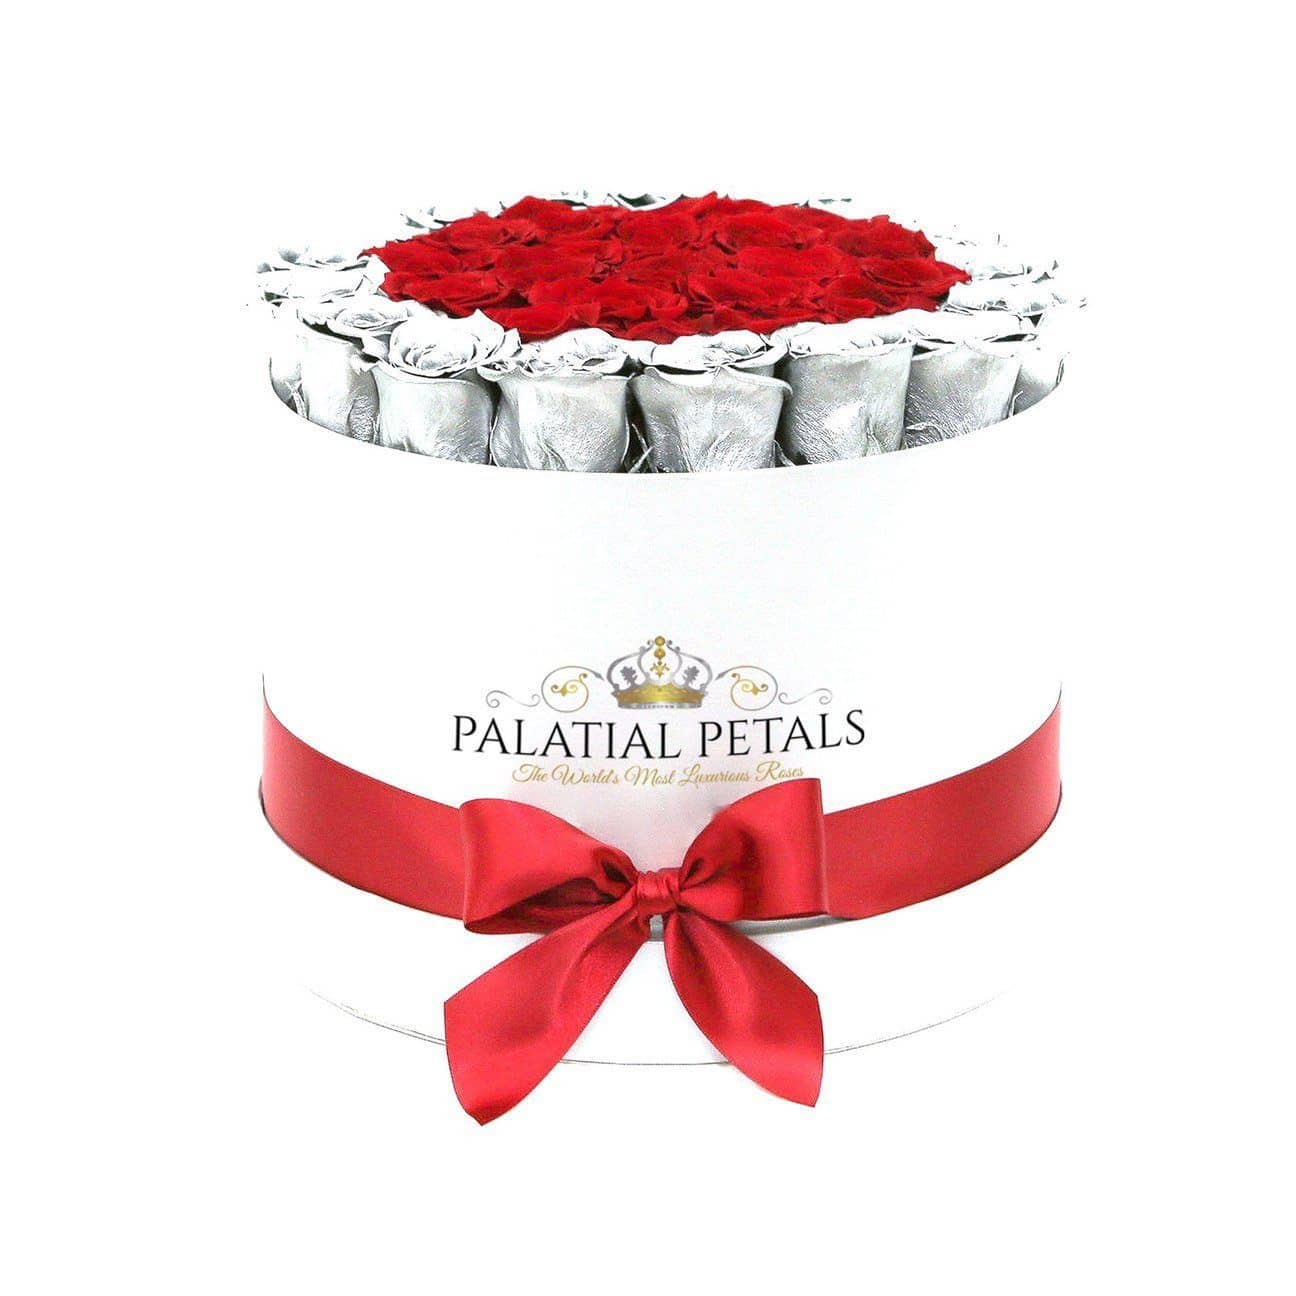 Metallic Silver & Red Roses That Last A Year - Large Rose Box